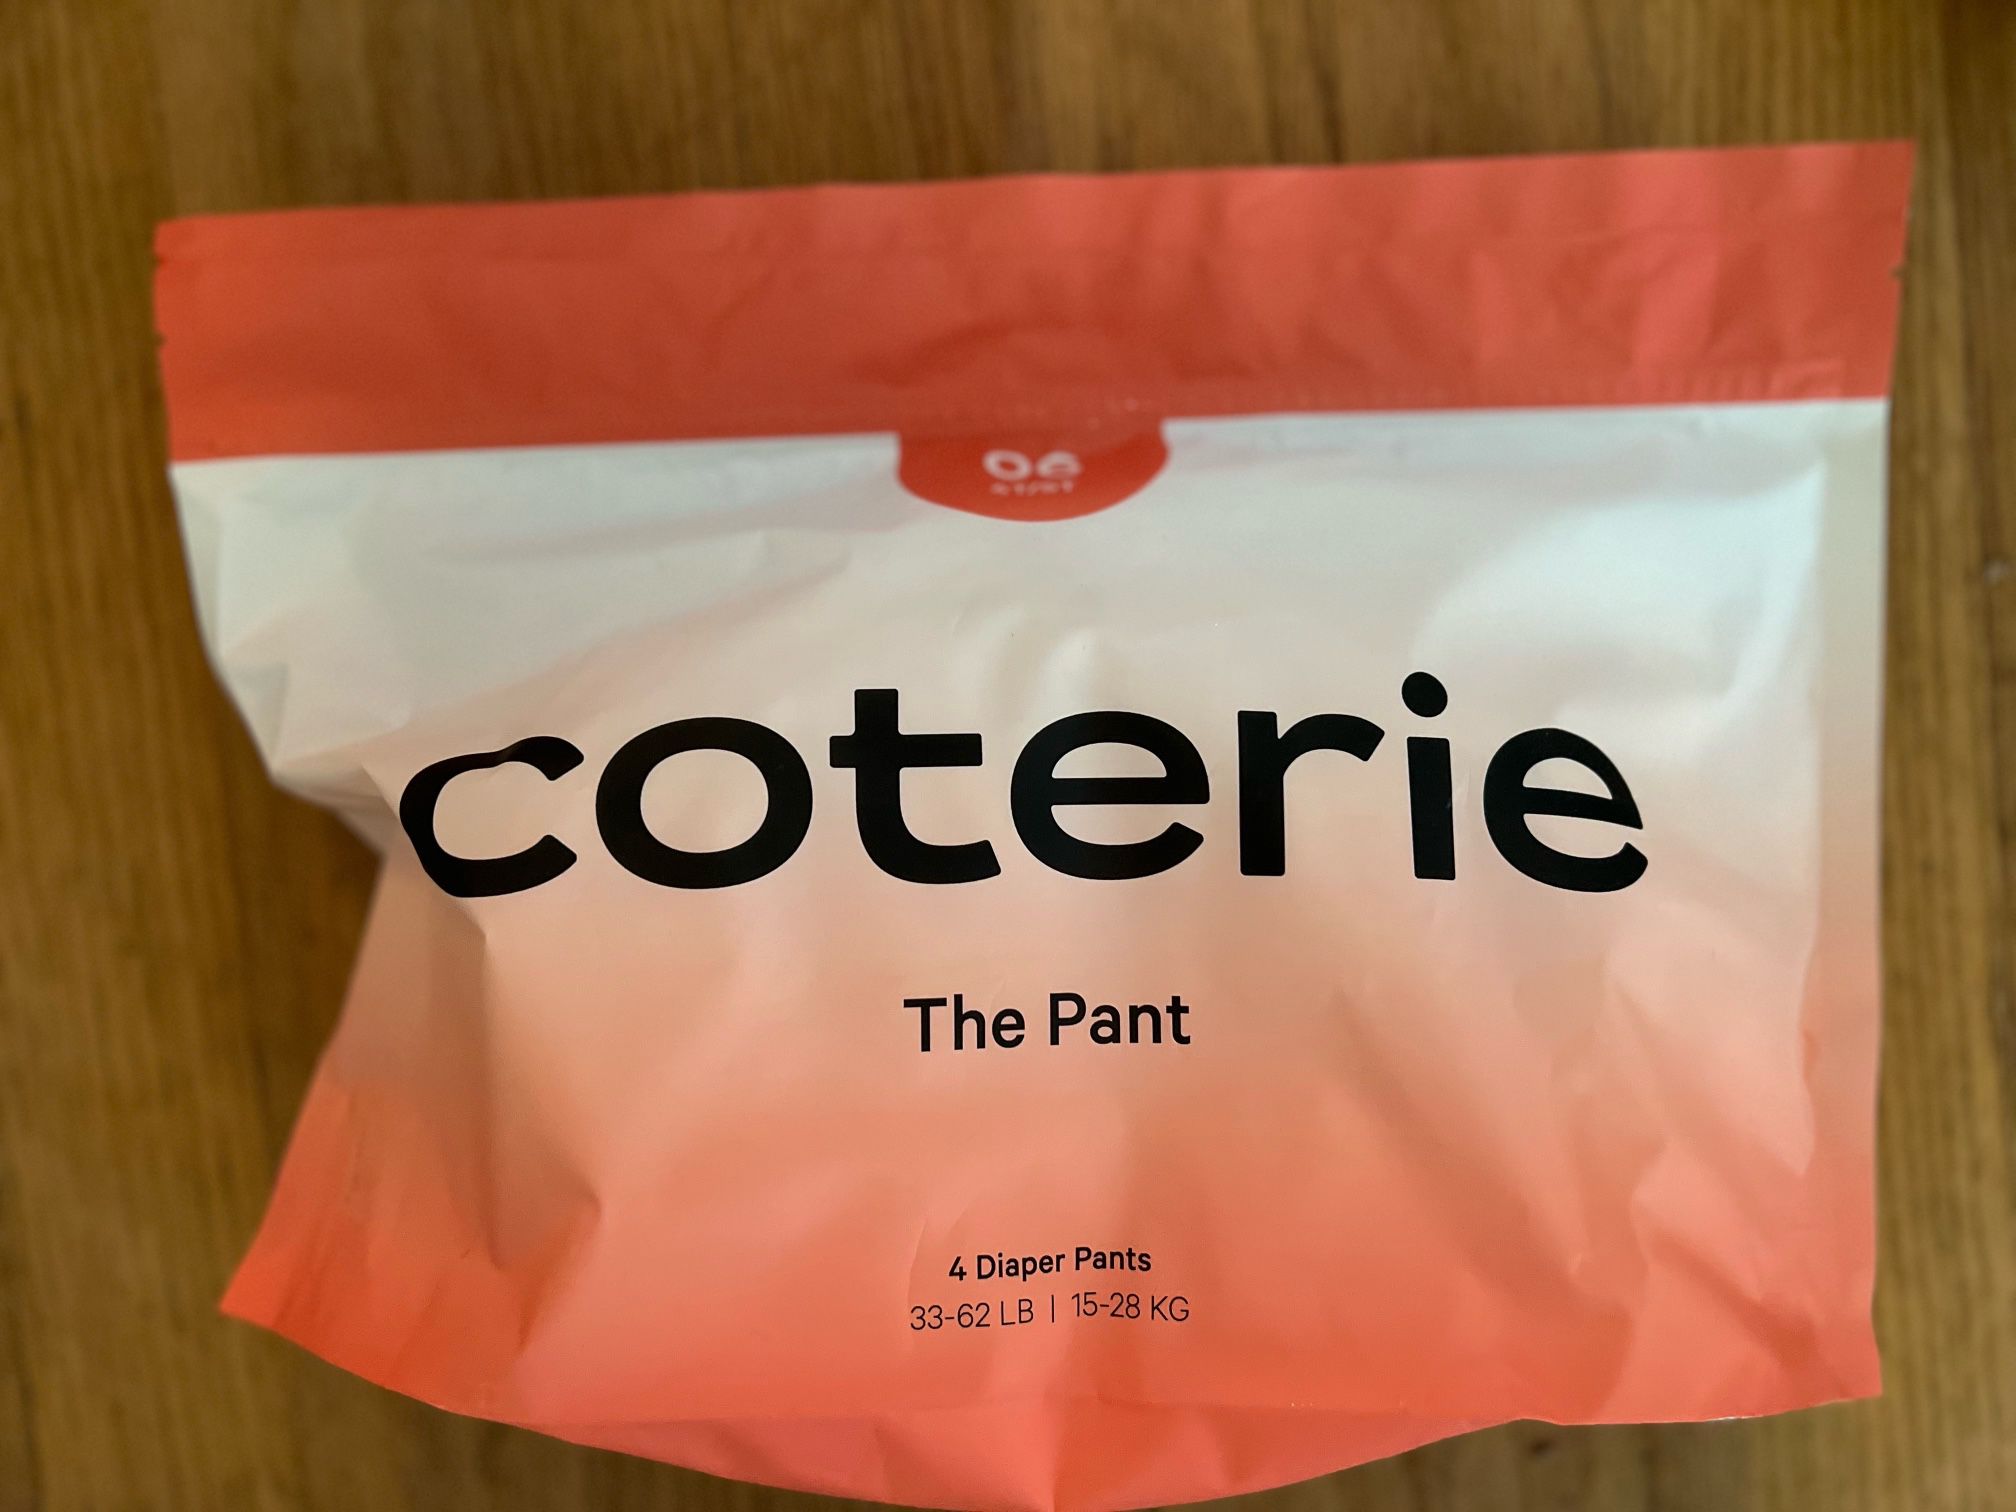 Coterie diapers the pants size 4T-5T